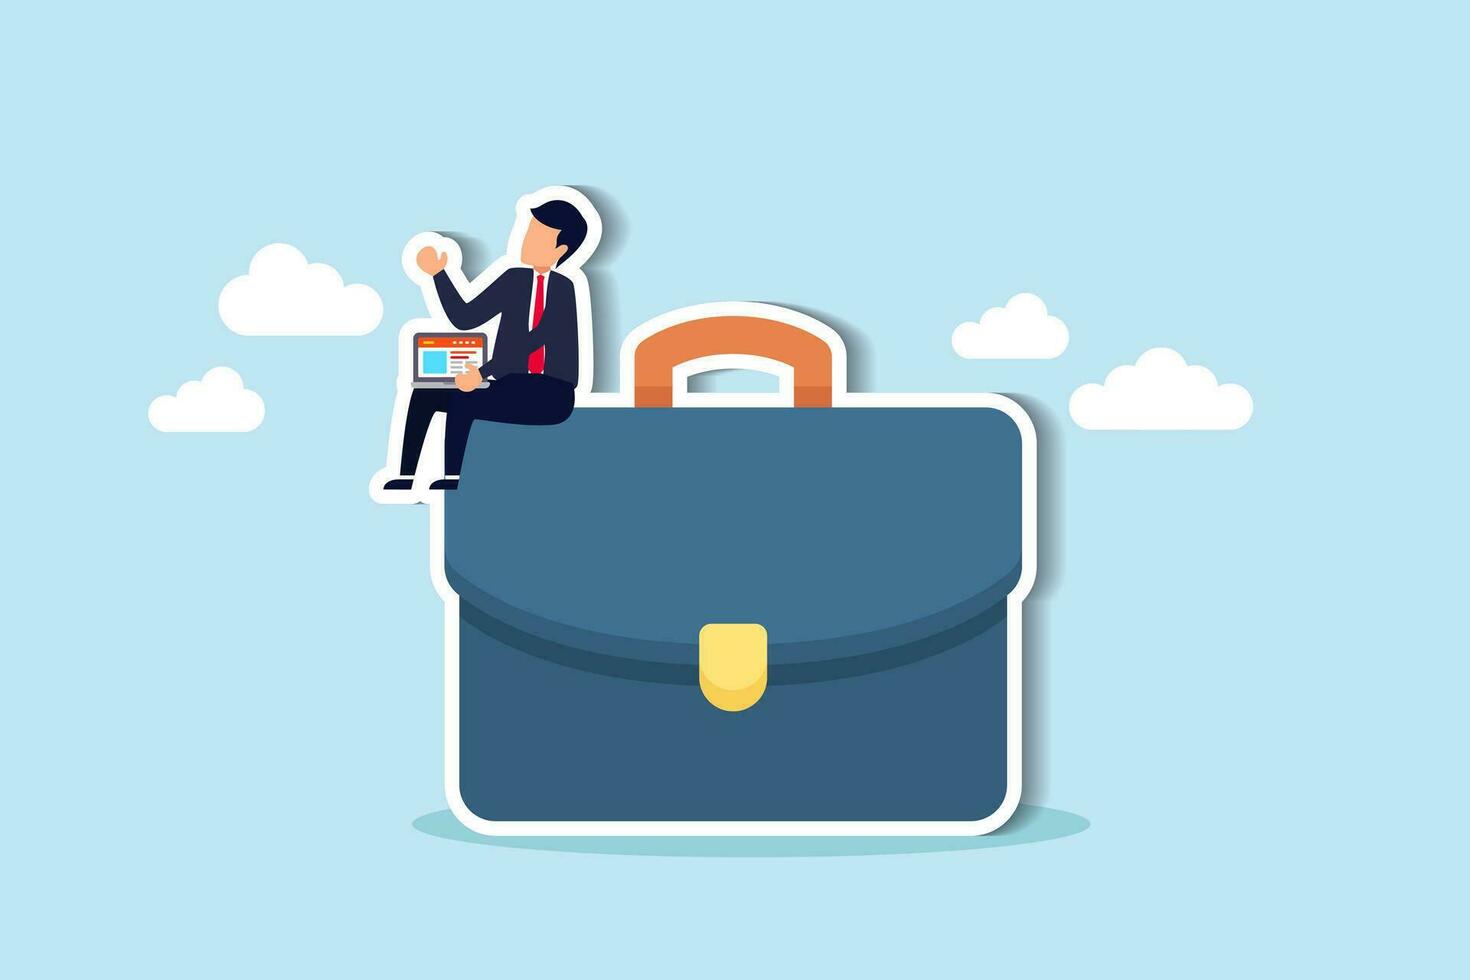 Work experience, expertise or professional employee, specialist skill, occupation or administrator work, wisdom or employment concept, confidence businessman working with computer laptop on briefcase. vector